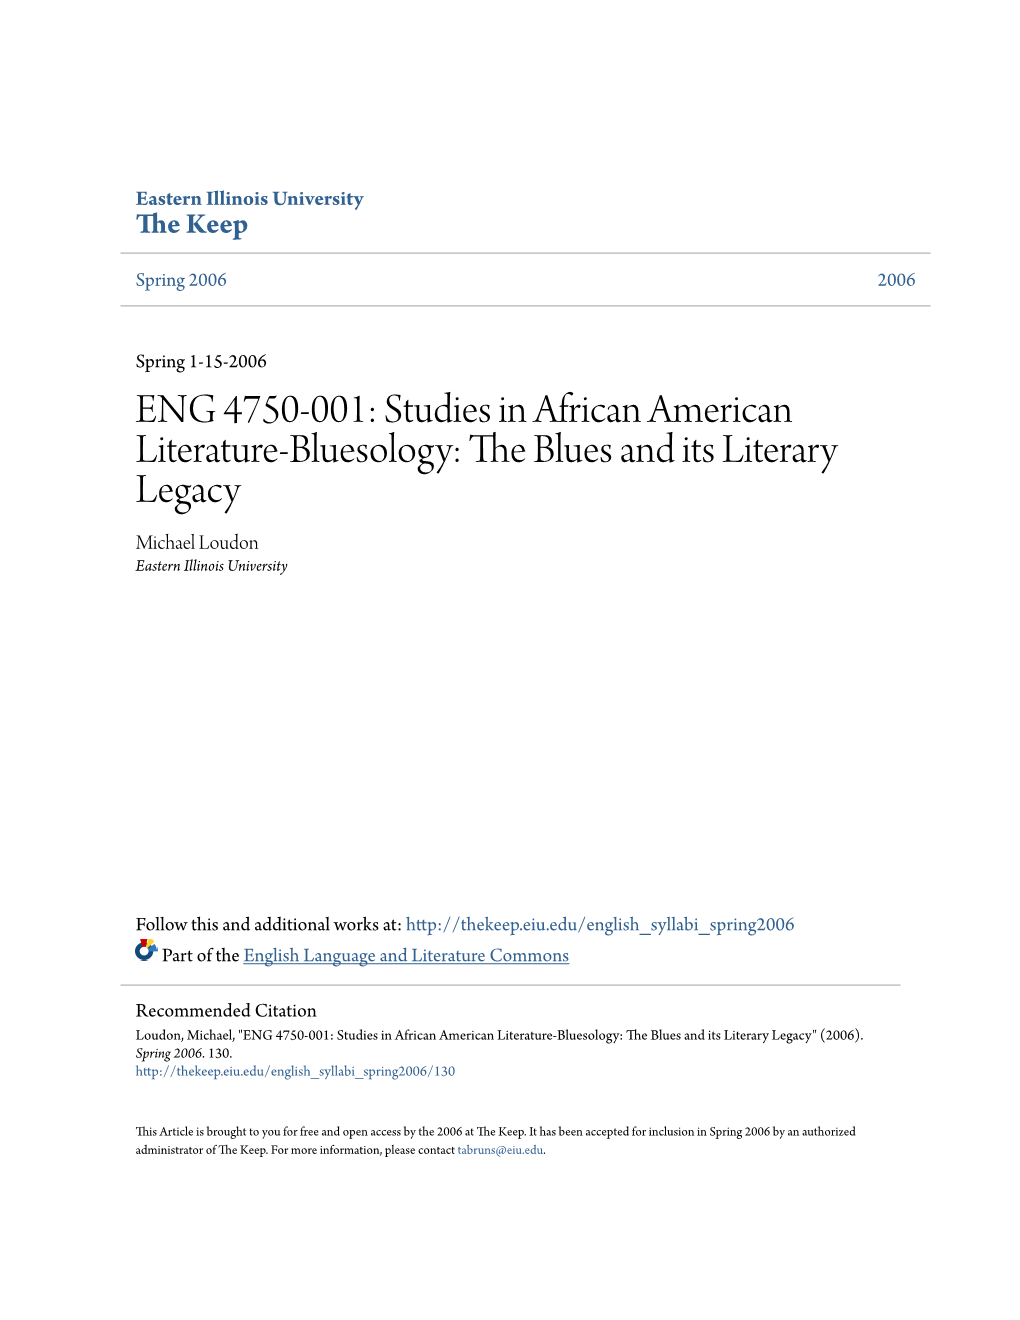 Studies in African American Literature-Bluesology: the Luesb and Its Literary Legacy Michael Loudon Eastern Illinois University